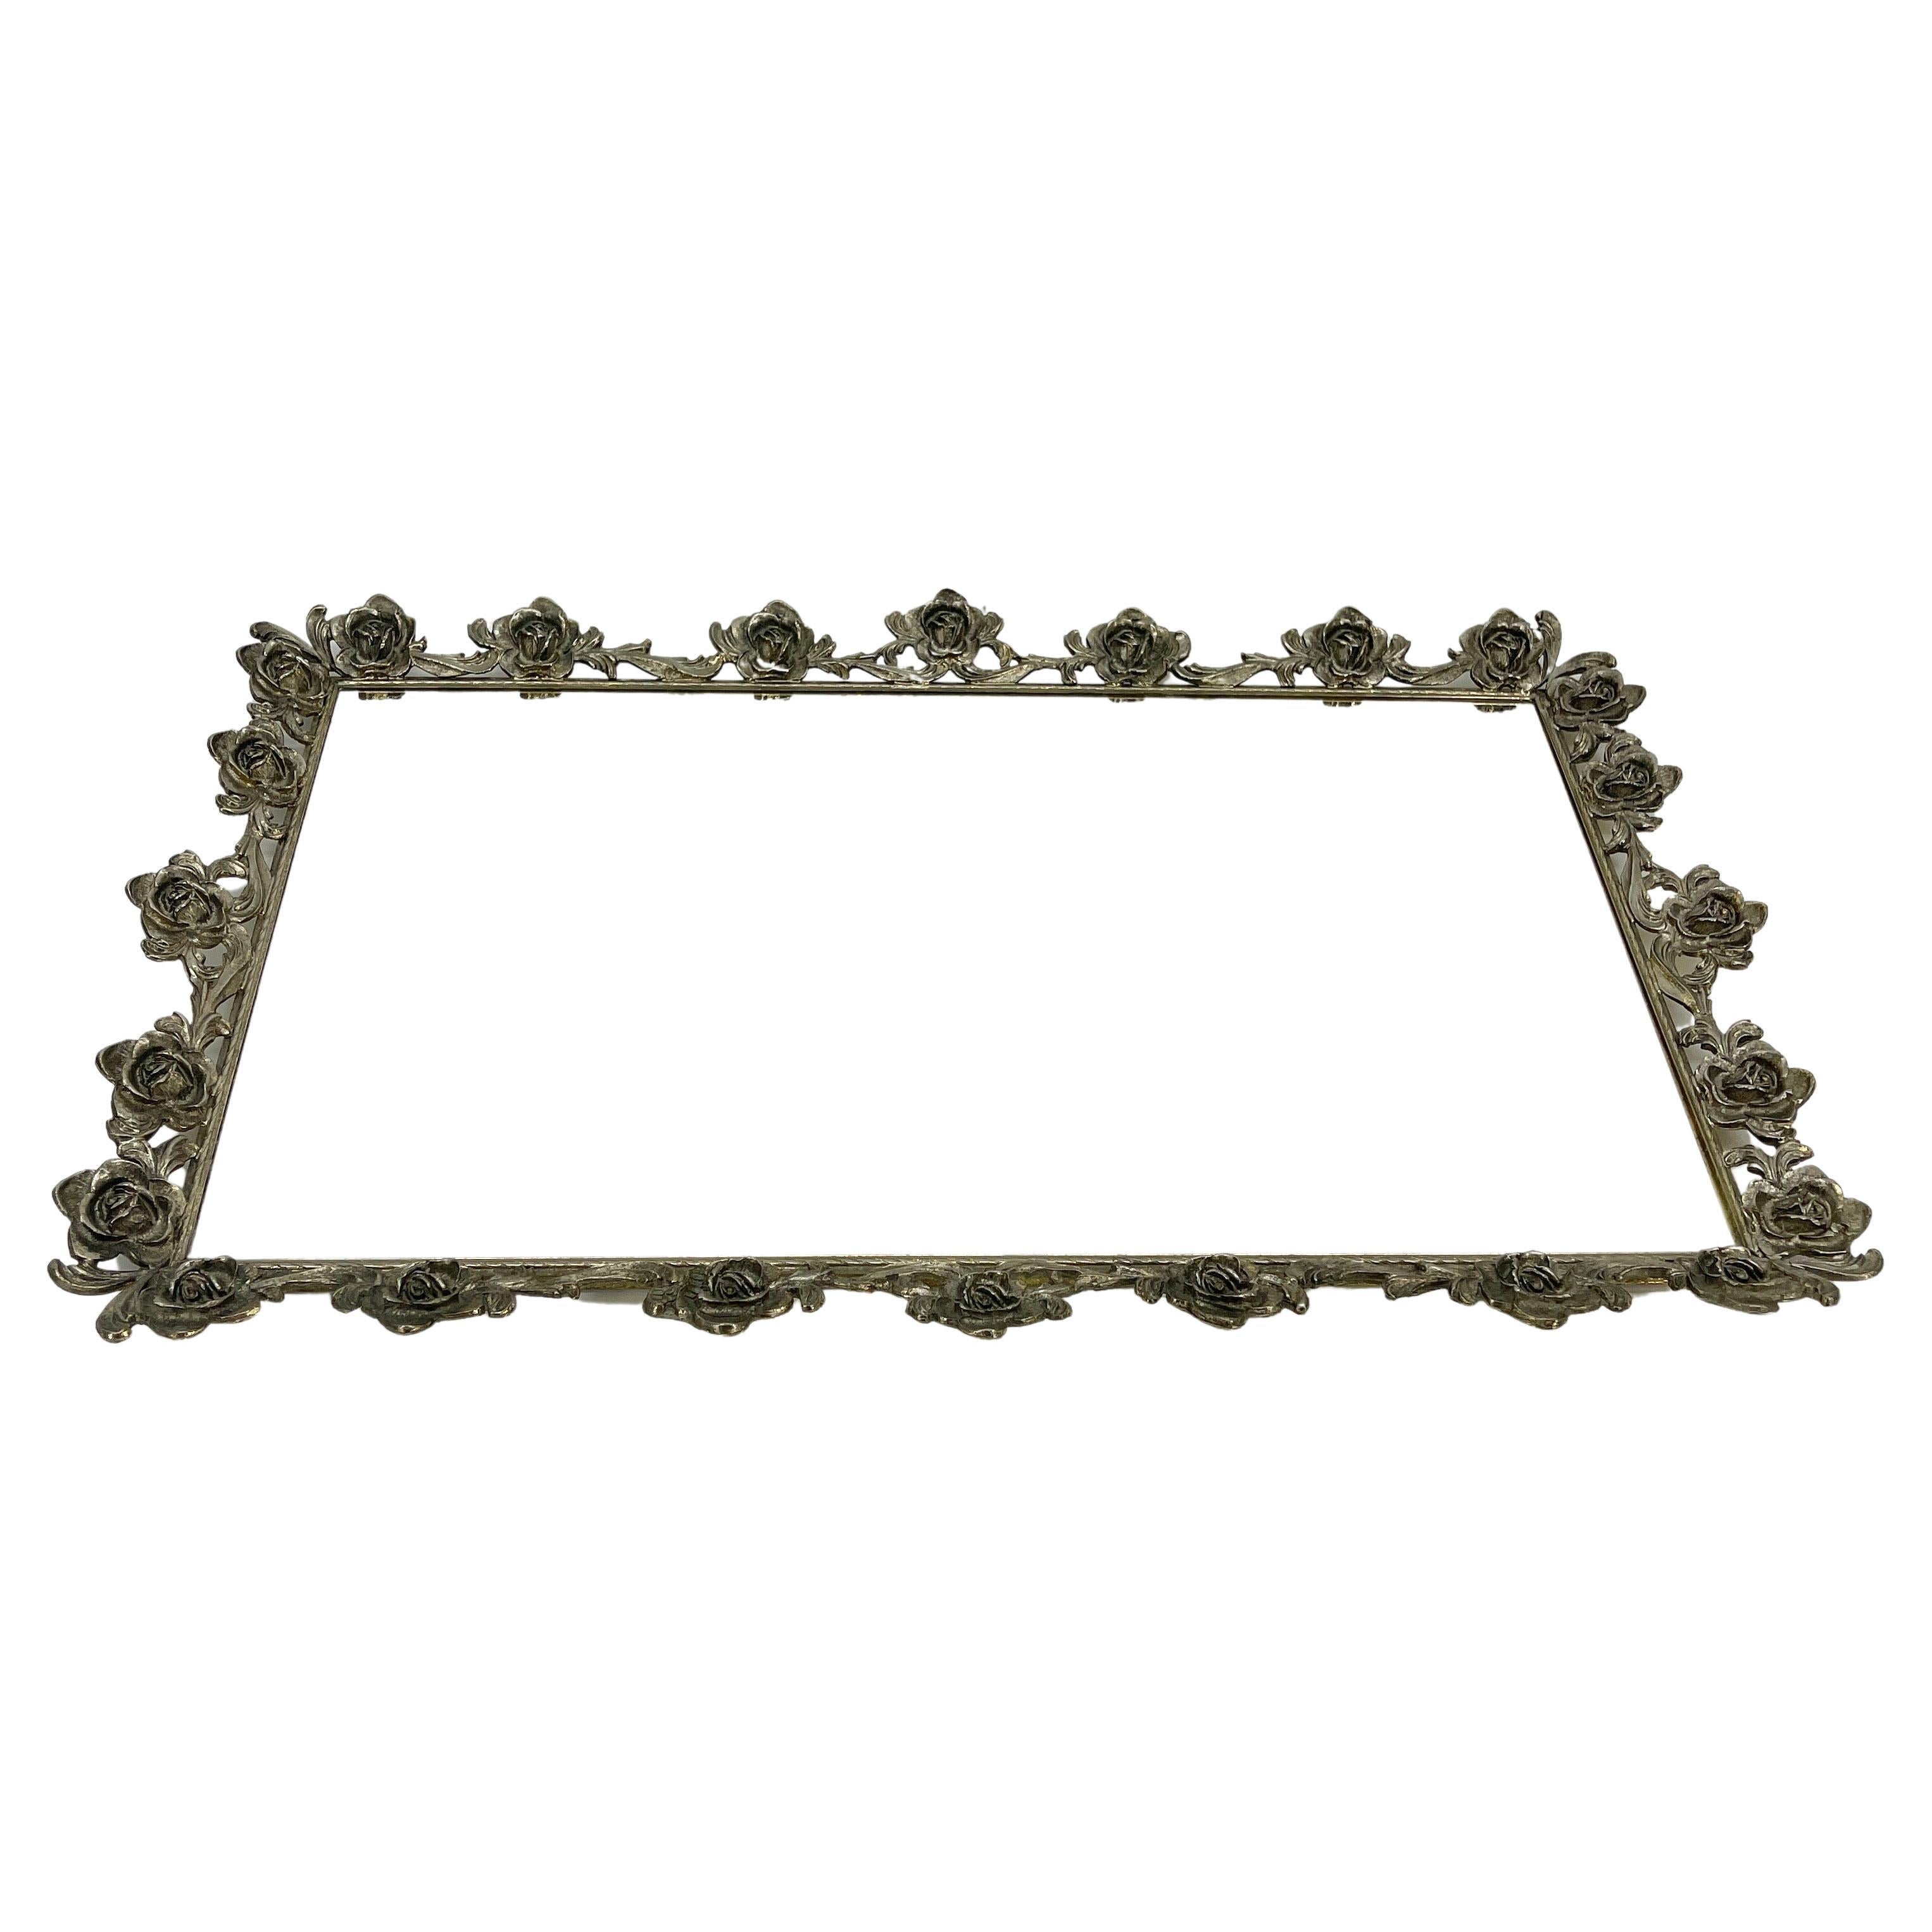 Hollywood Regency gilded vanity tray. Large rectangular hand forged ornate tray with ornate rose floral design. The delicate floral design is beautifully elegant. The tray is sturdy and is as comfortable resting on top of a dresser, dining table or